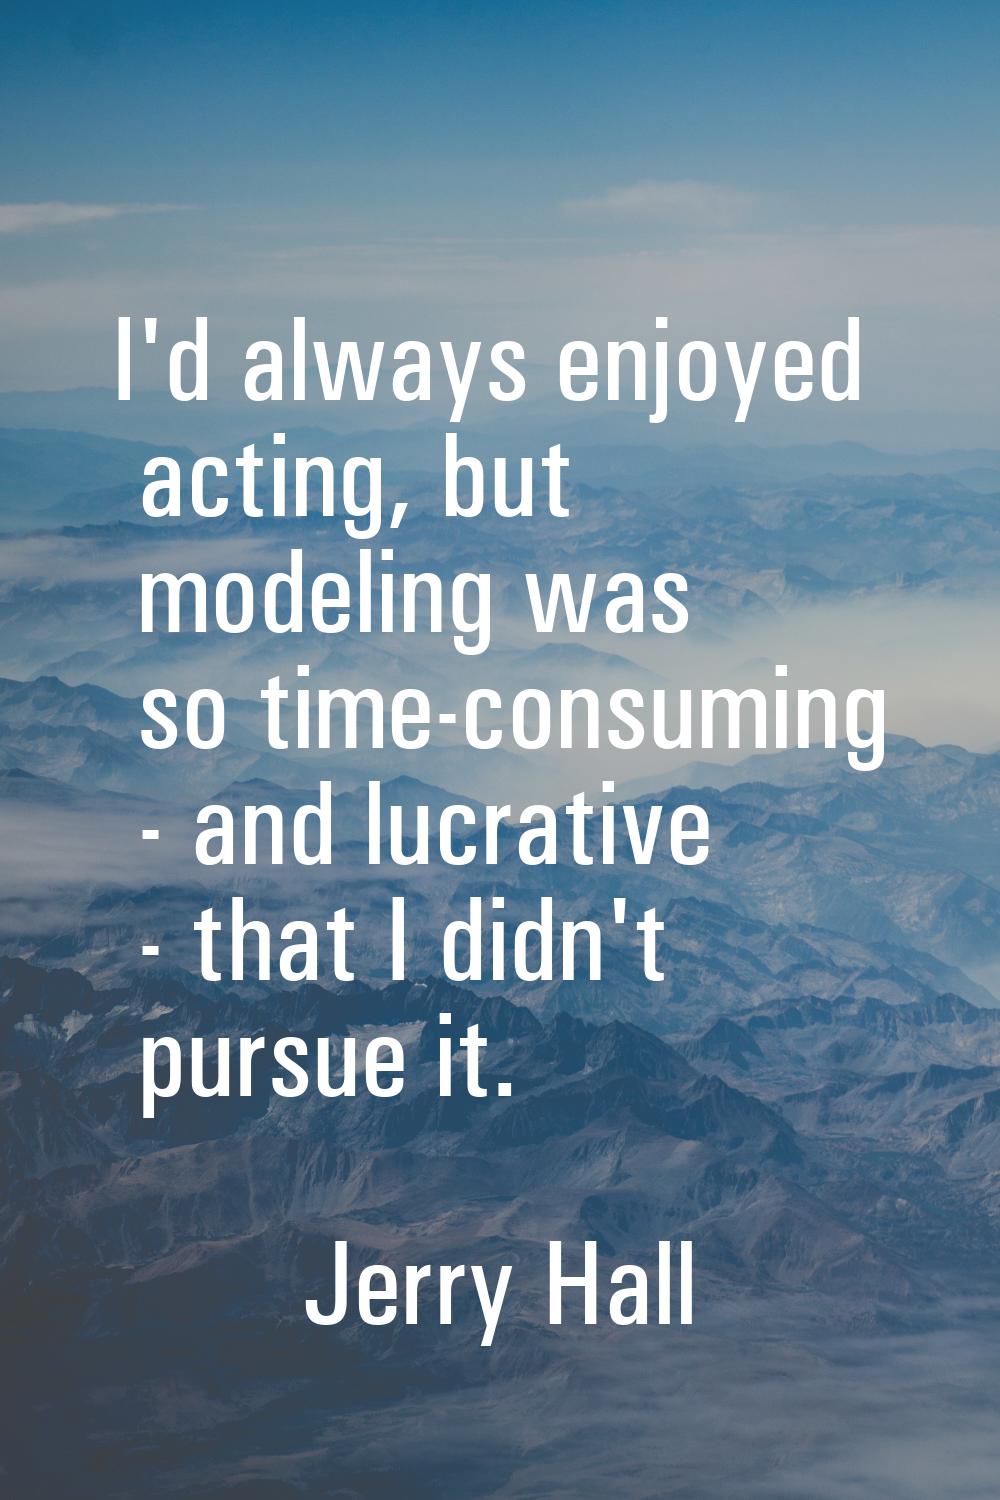 I'd always enjoyed acting, but modeling was so time-consuming - and lucrative - that I didn't pursu